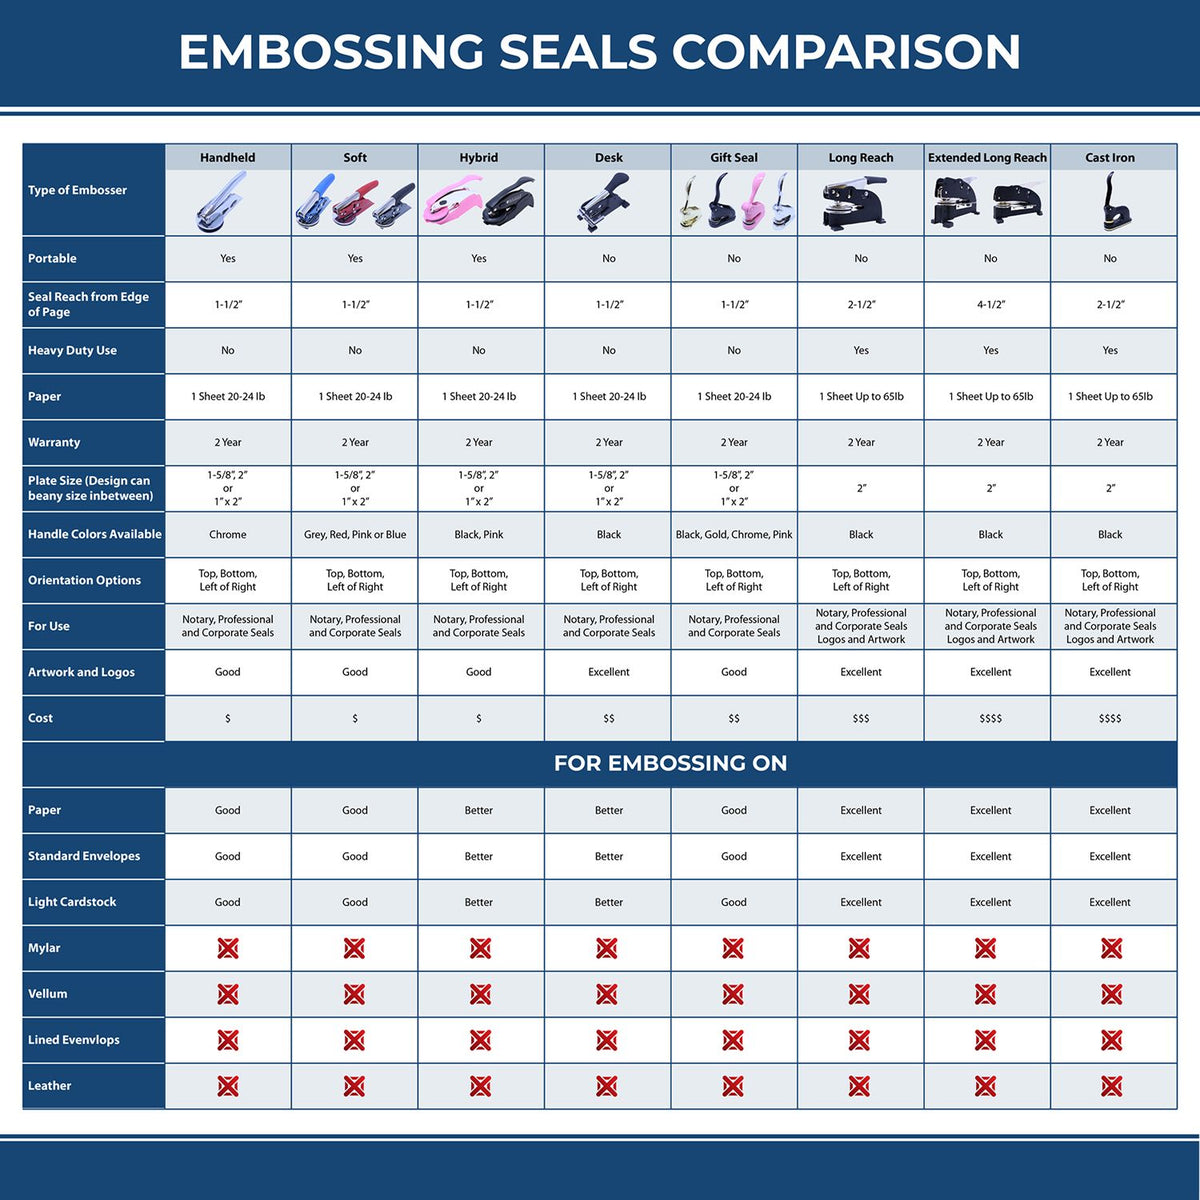 A comparison chart for the different types of mount models available for the Soft Pocket Mississippi Landscape Architect Embosser.